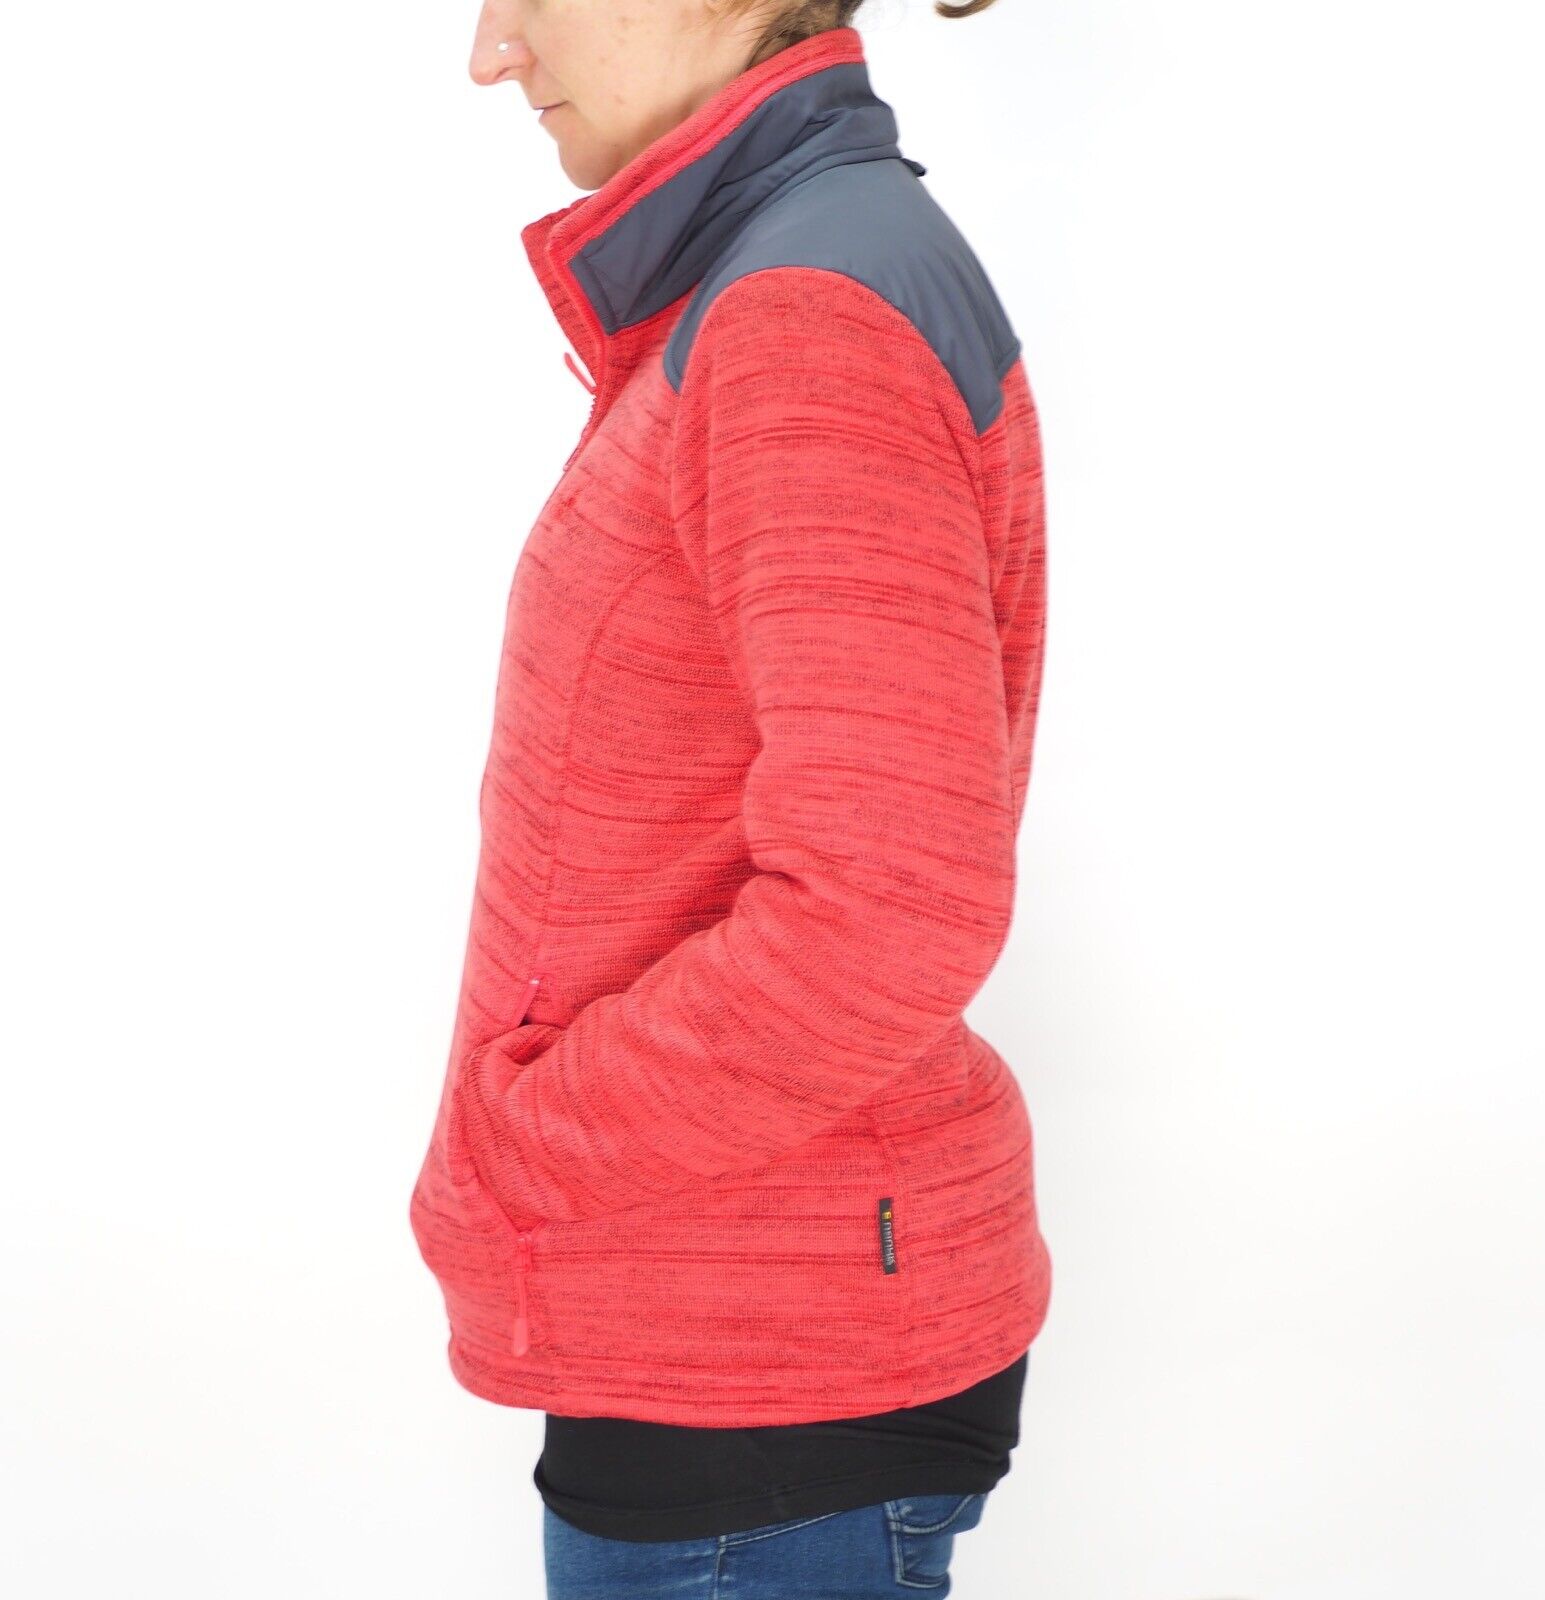 Womens Jack Wolfskin Aquila 1705921 Tulip Red Zip Up Light Breathable Jacket - London Top Style